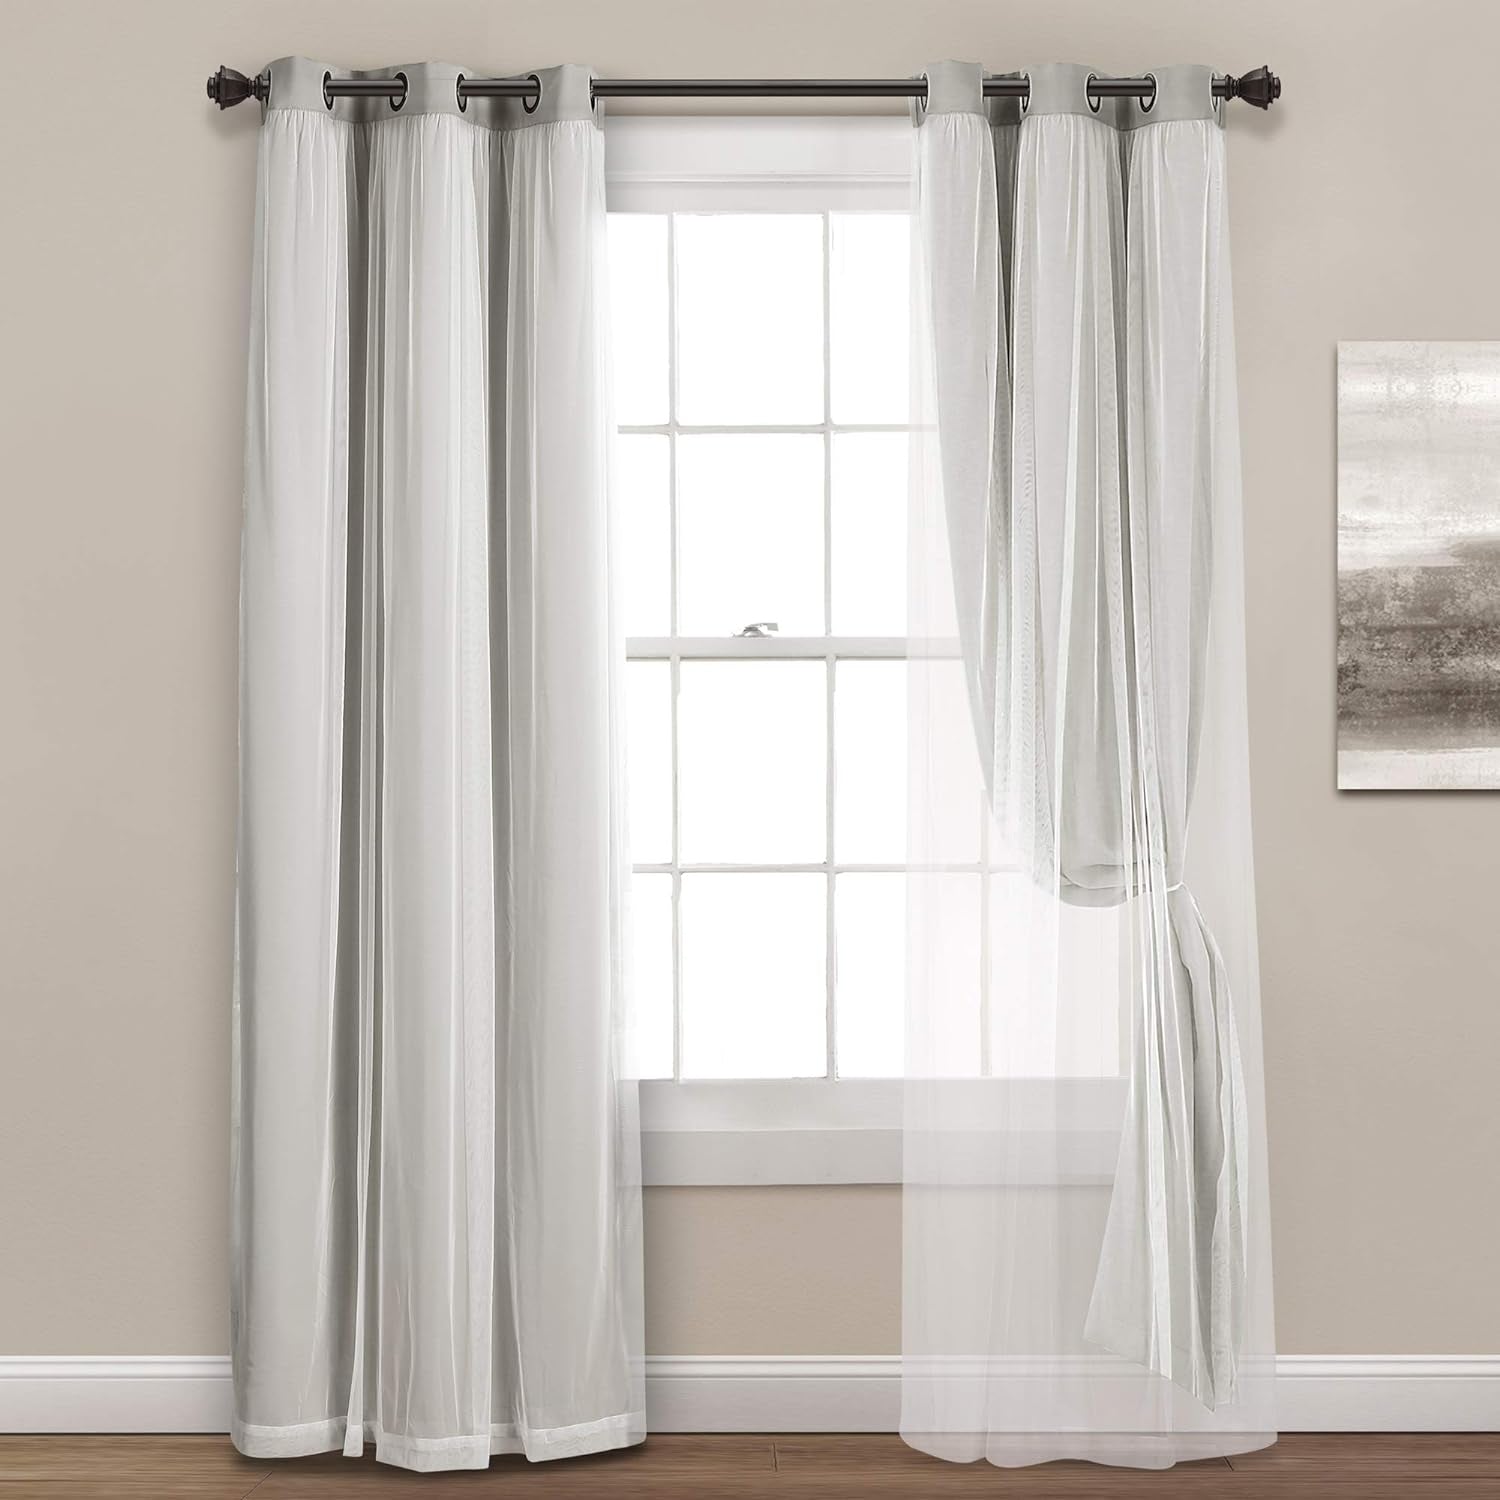 Sheer Grommet Curtains Panel with Insulated Blackout Lining, Room Darkening Window Curtain Set (Pair), 38"W X 108"L, Light Gray